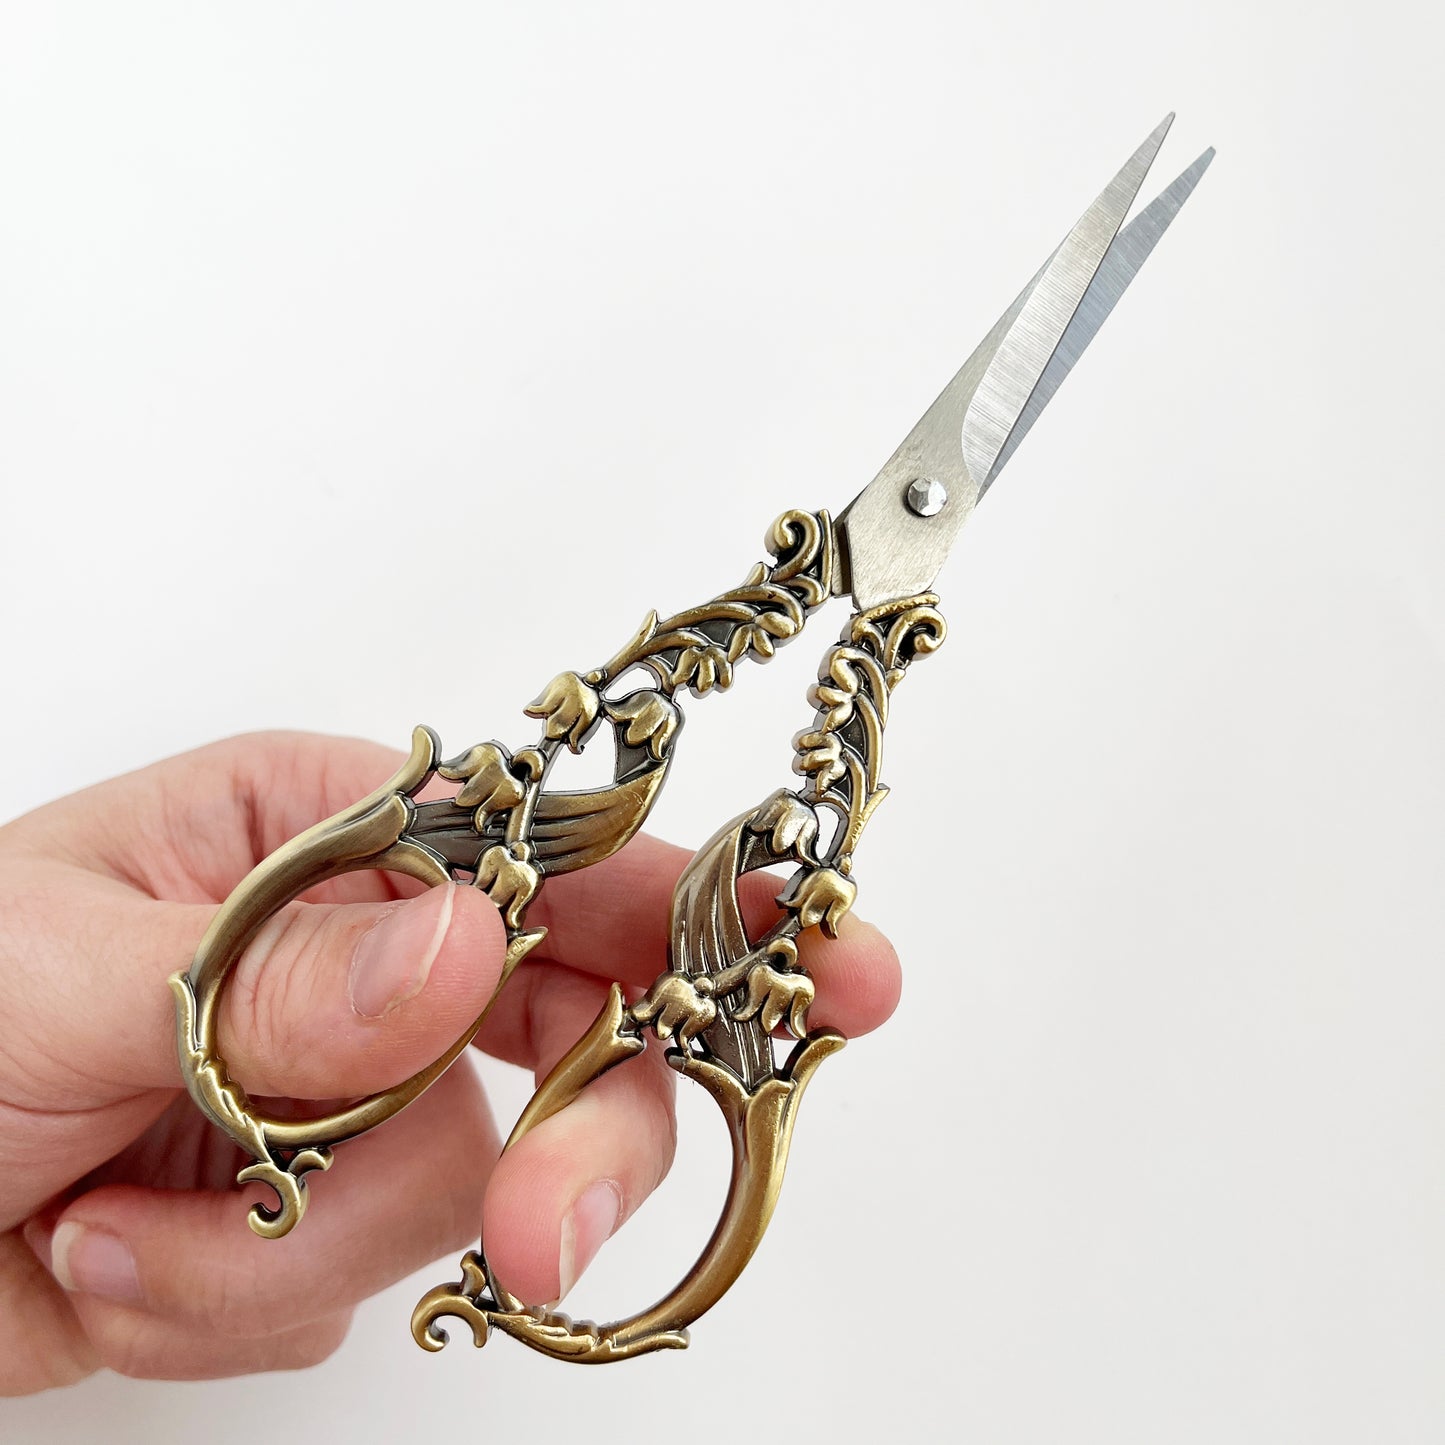 Lily of the Valley craft scissors